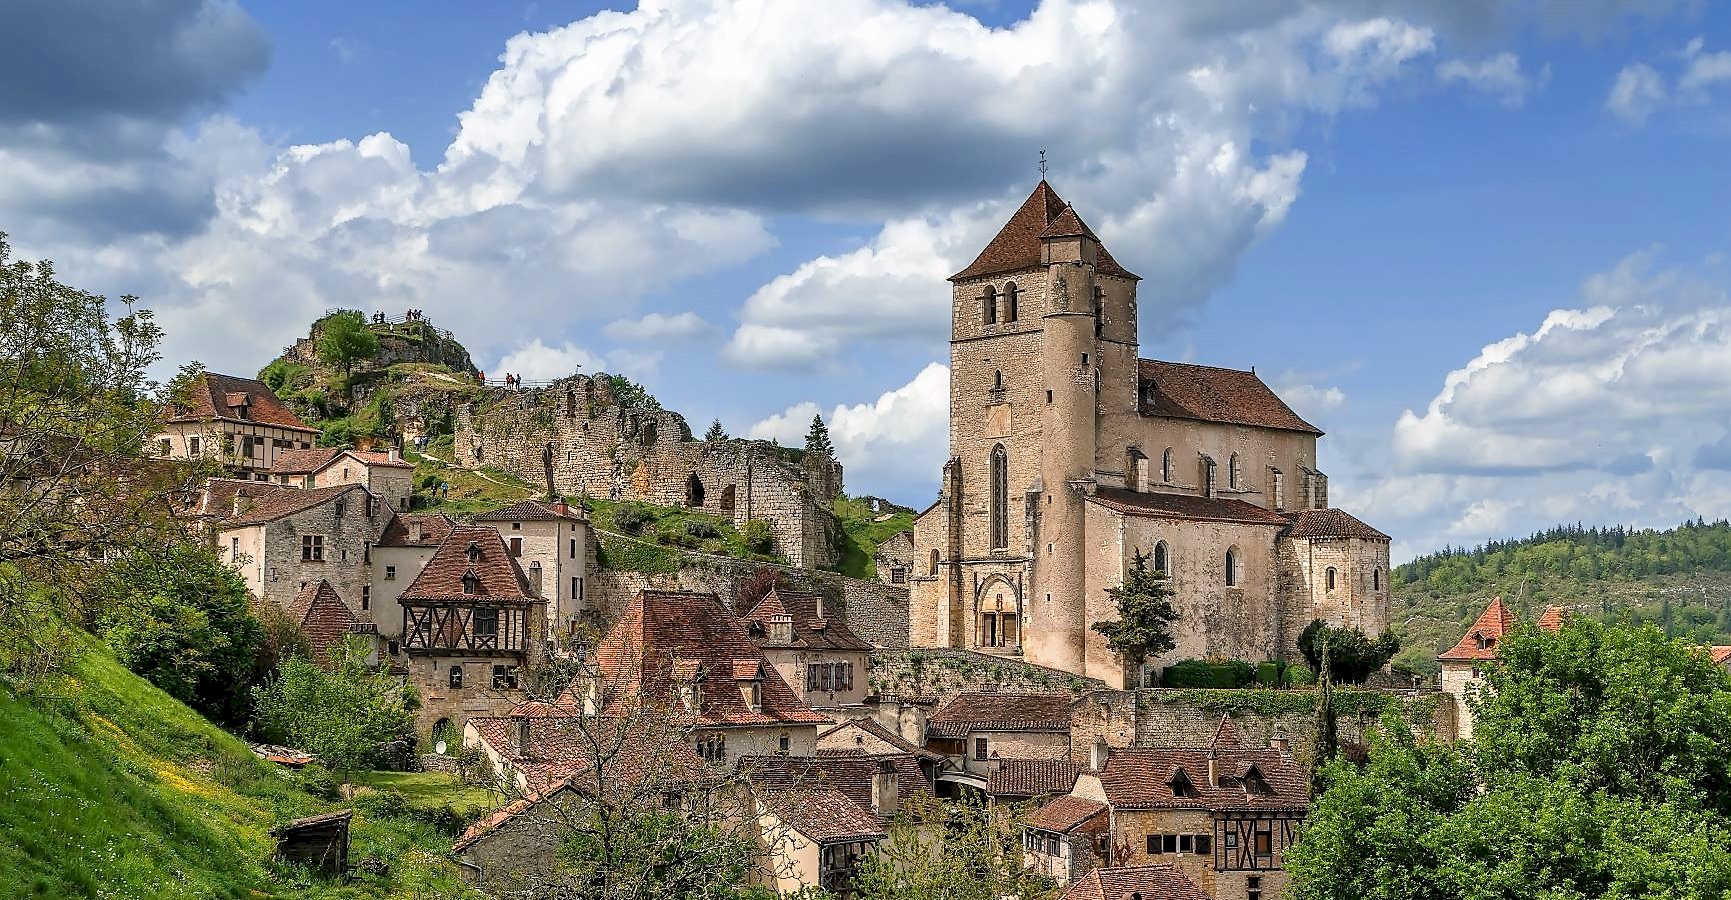 Ophorus Tours - A Private Day Trip from Sarlat to Pech Merle Cave & Saint Cirq Lapopie Village